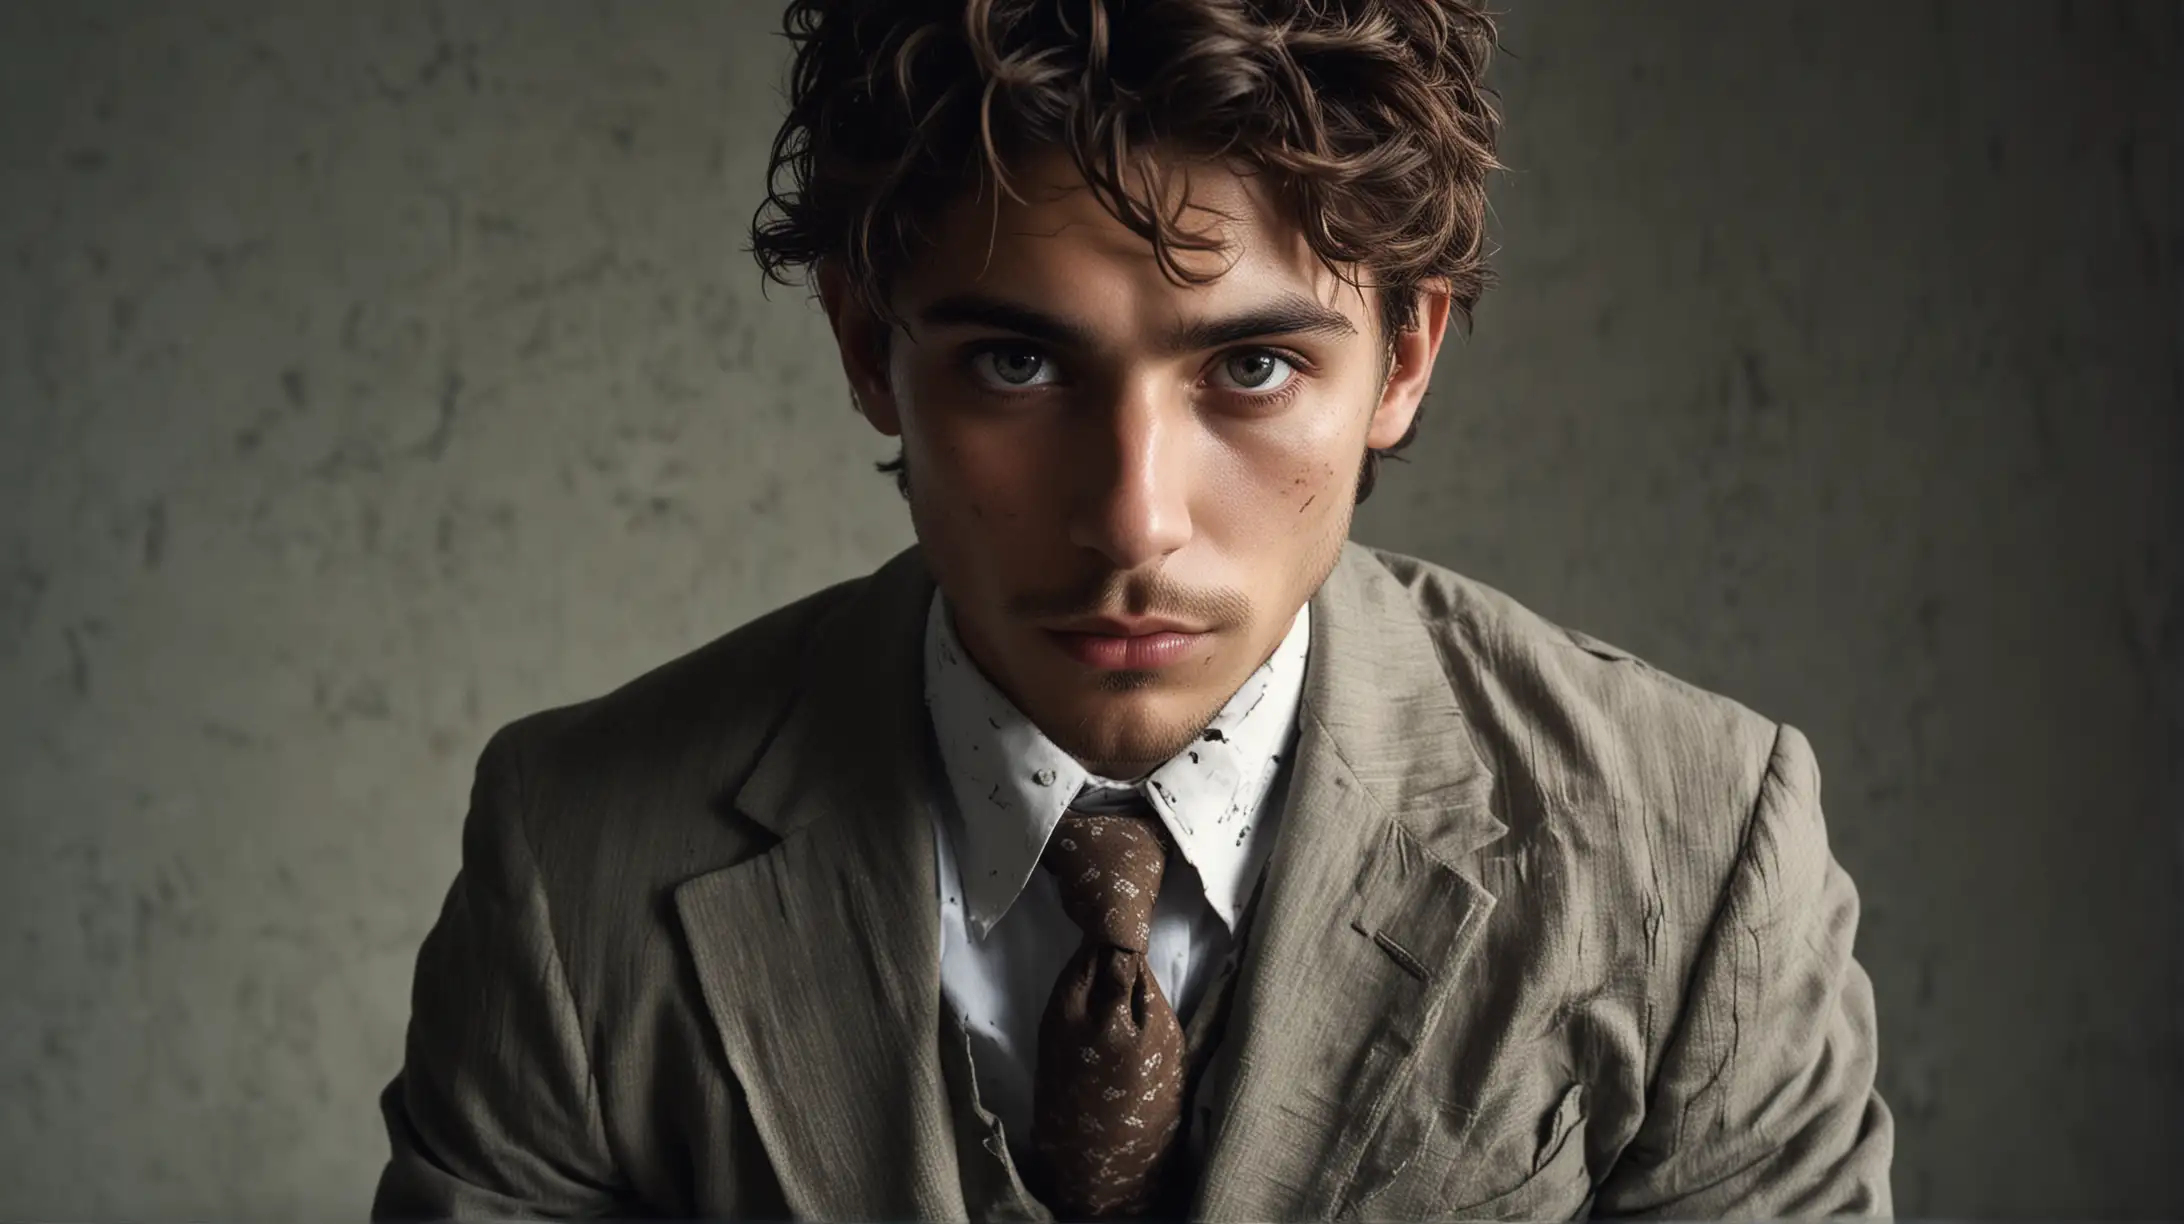 Classic portrait-style photography, a young Shia LeBoef, wild-eyed, wearing crumpled suit, good looking, photo realistic, cinematic lighting